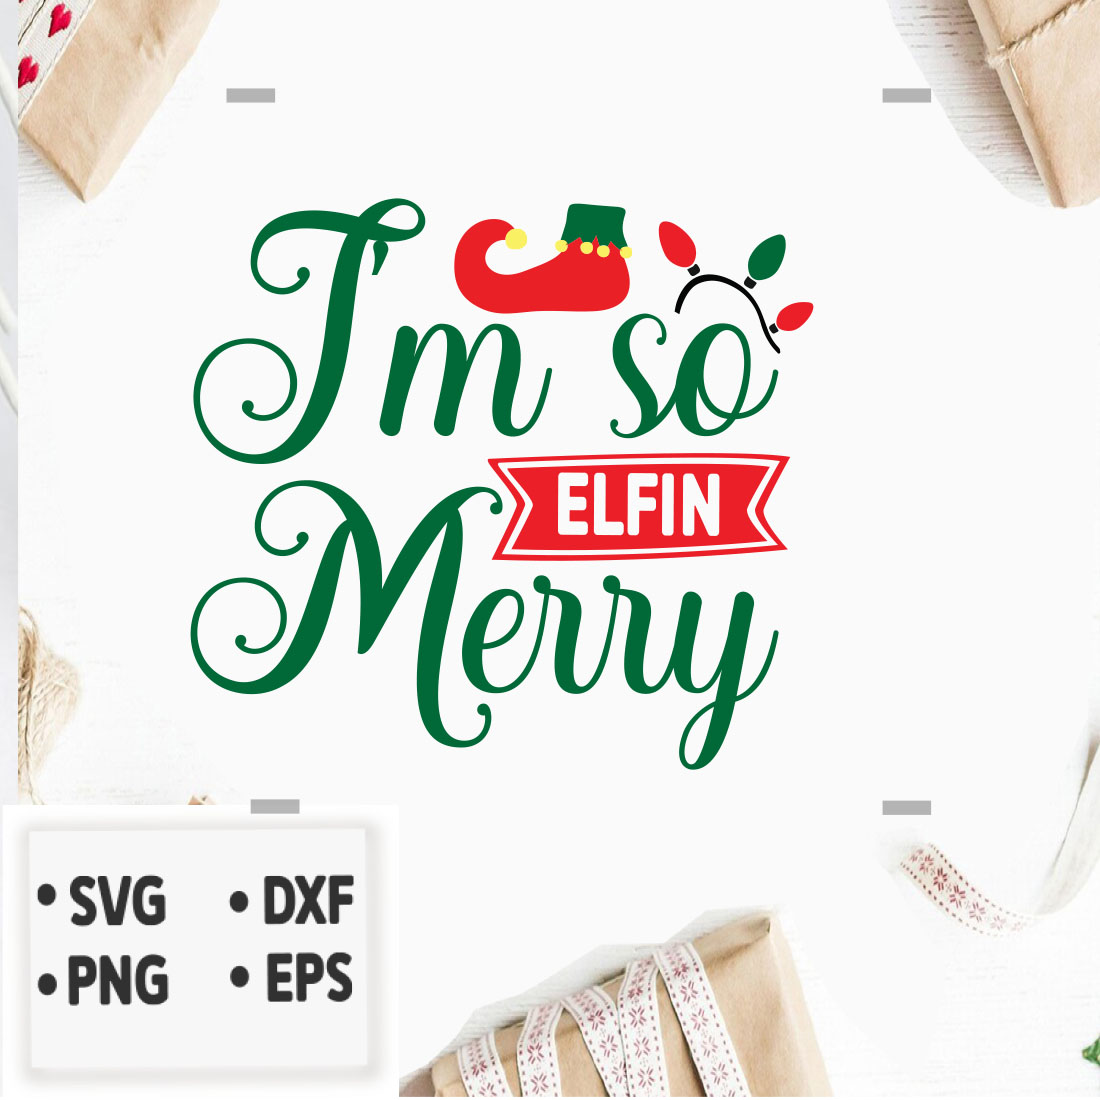 Add some Christmas magic to your designs.